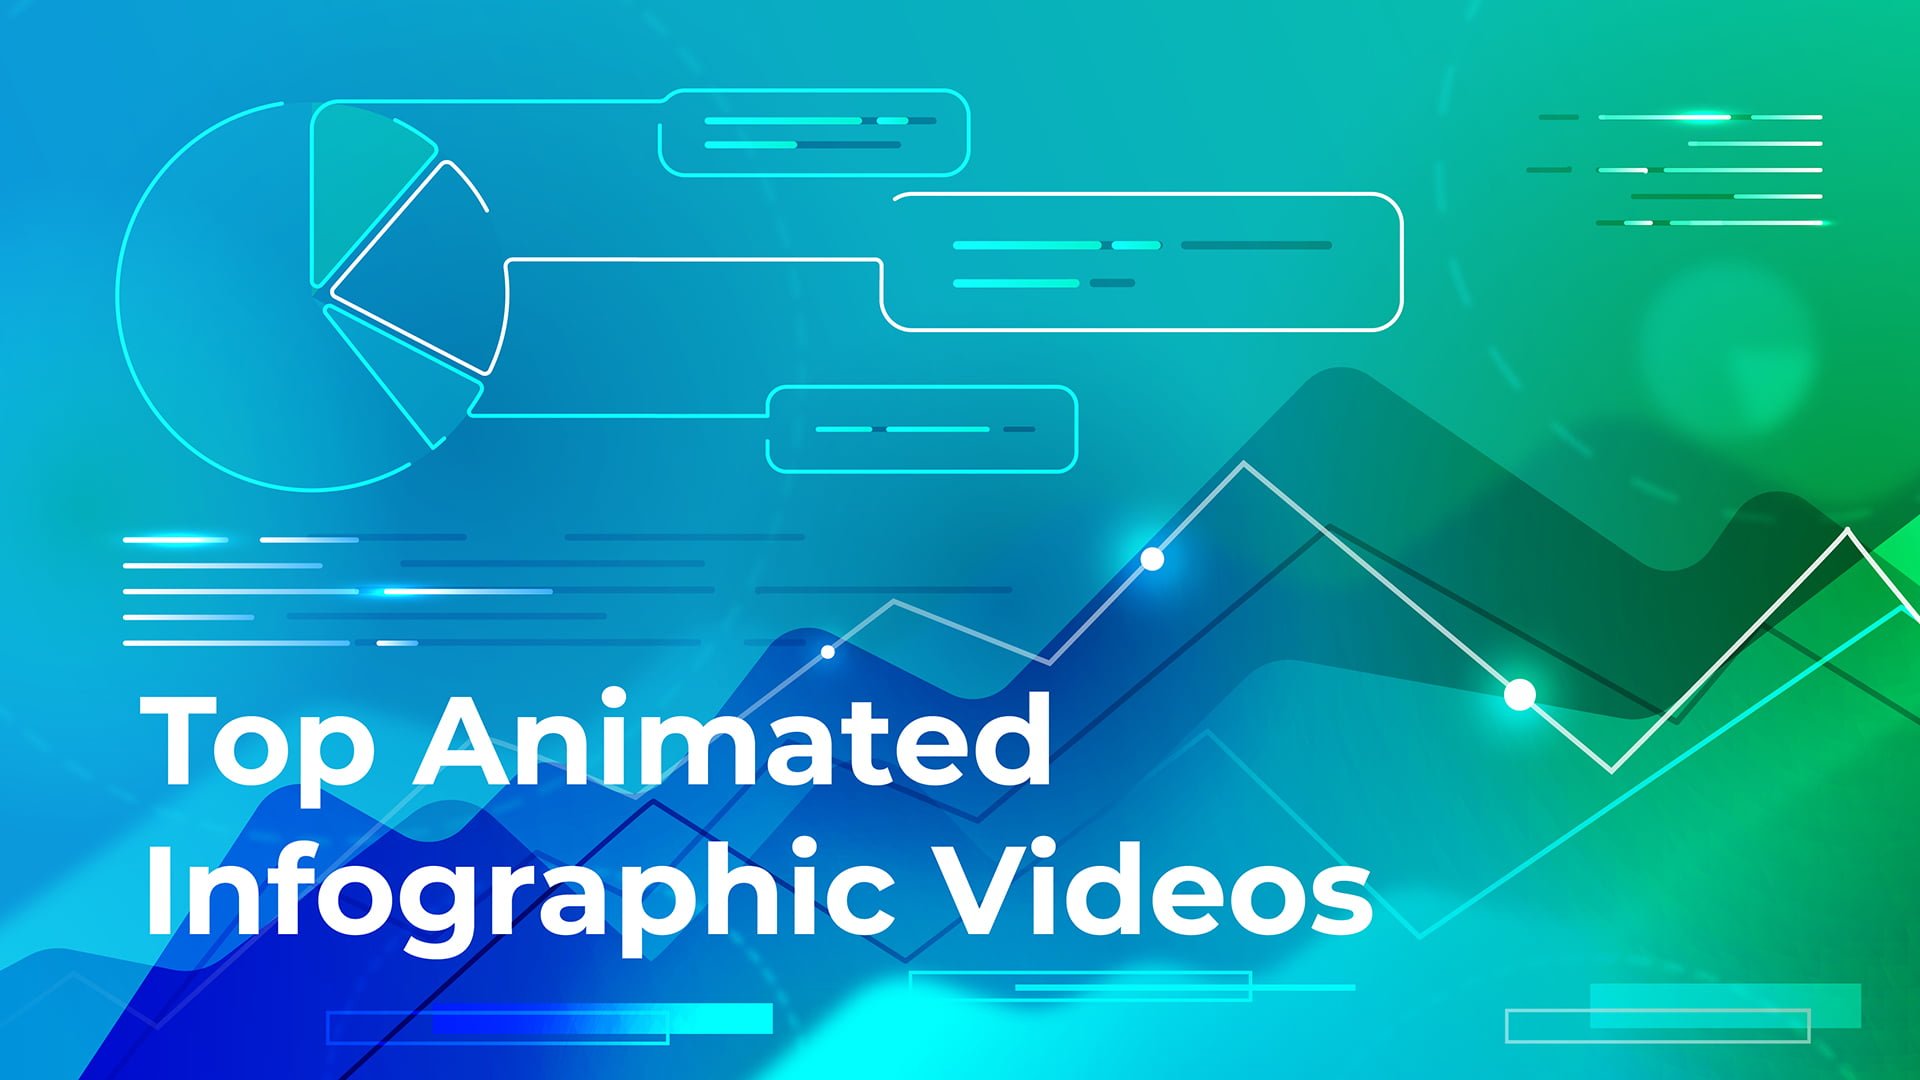 Top Animated Infographic Videos